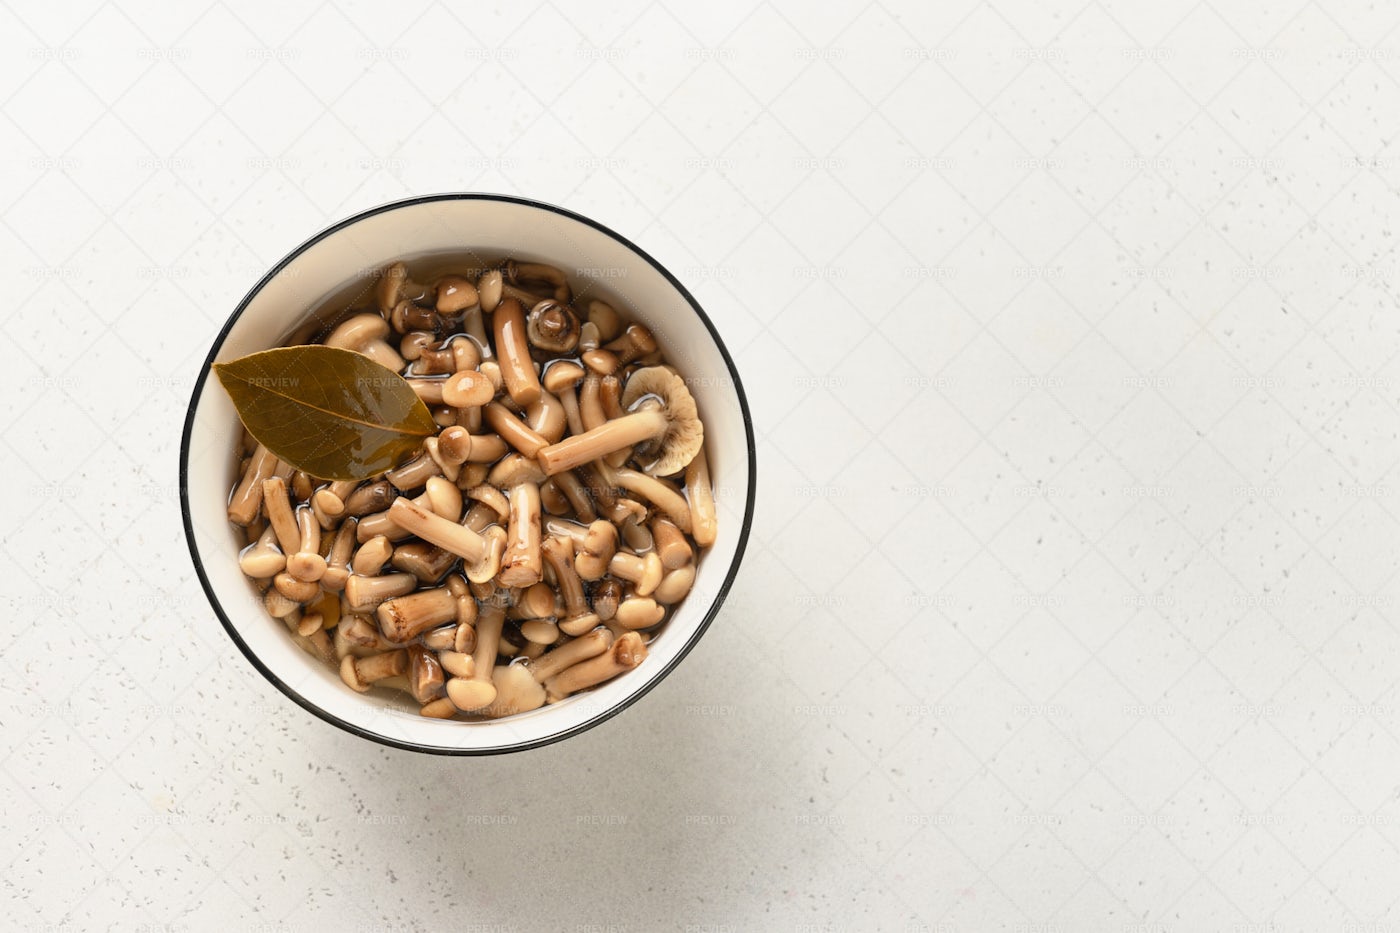 Pickled Mushrooms In A Bowl: Stock Photos